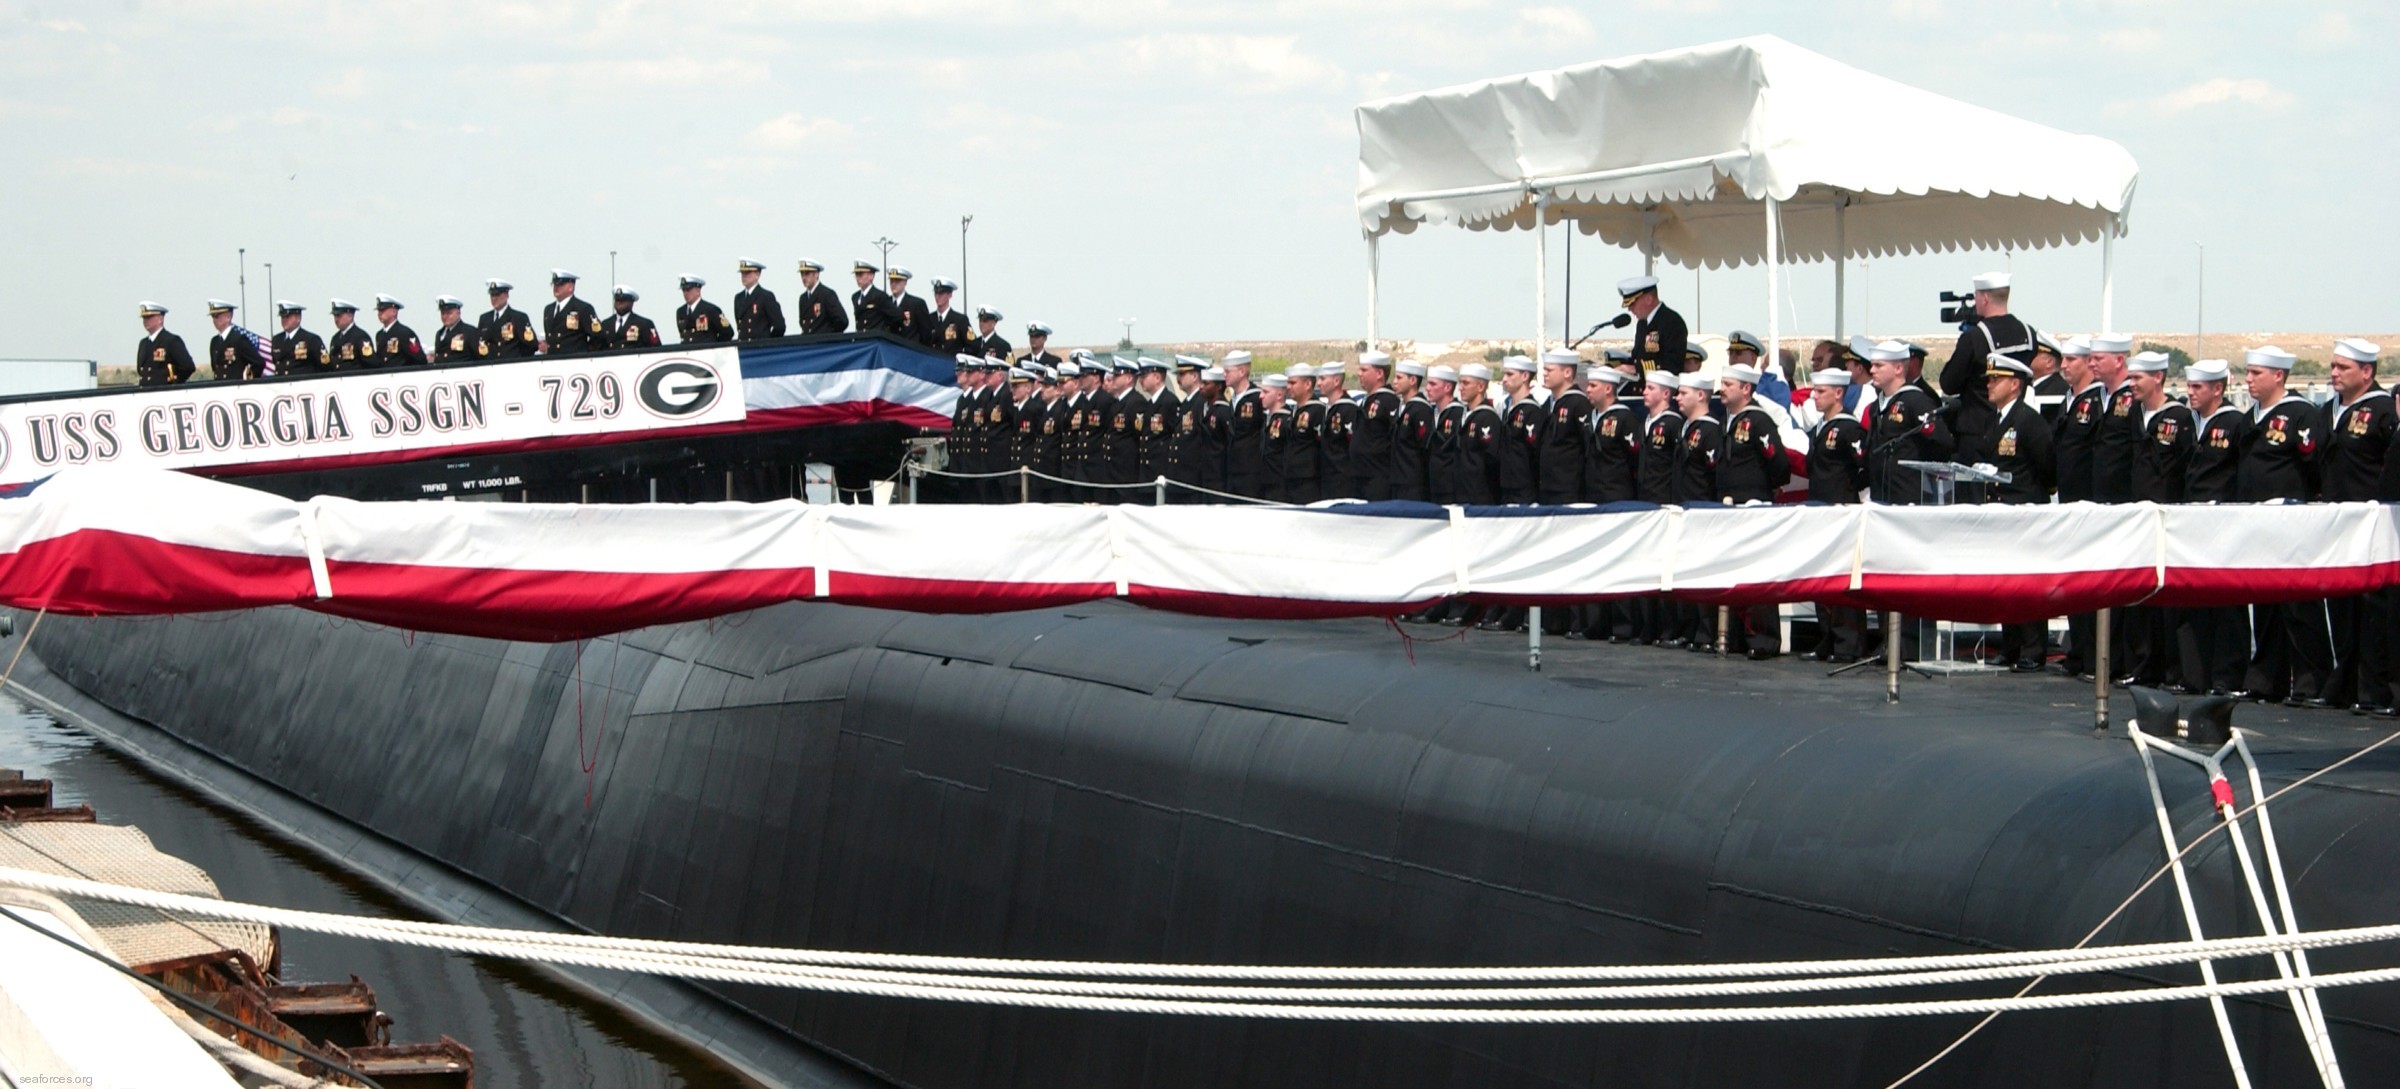 ssgn-729 uss georgia guided missile submarine 2008 39 recommissioning ceremony kings bay